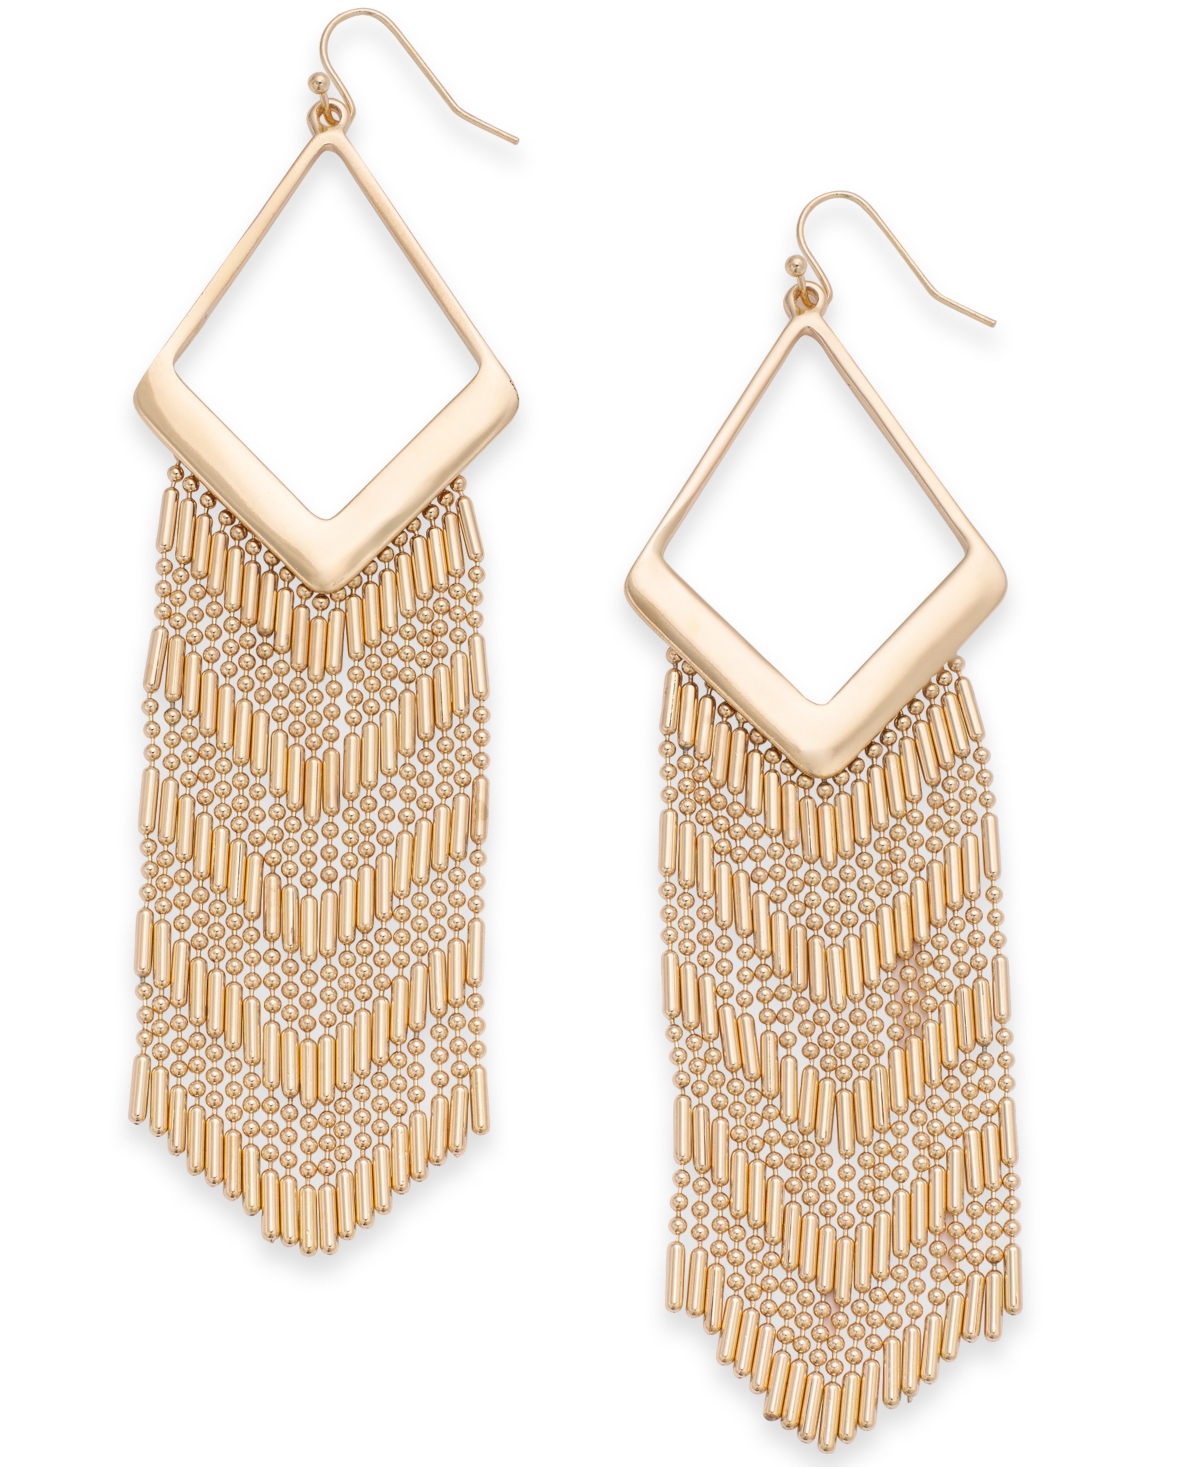 Gold-Tone Chain Fringe Chandelier Earrings, Created for Macy's - Gold